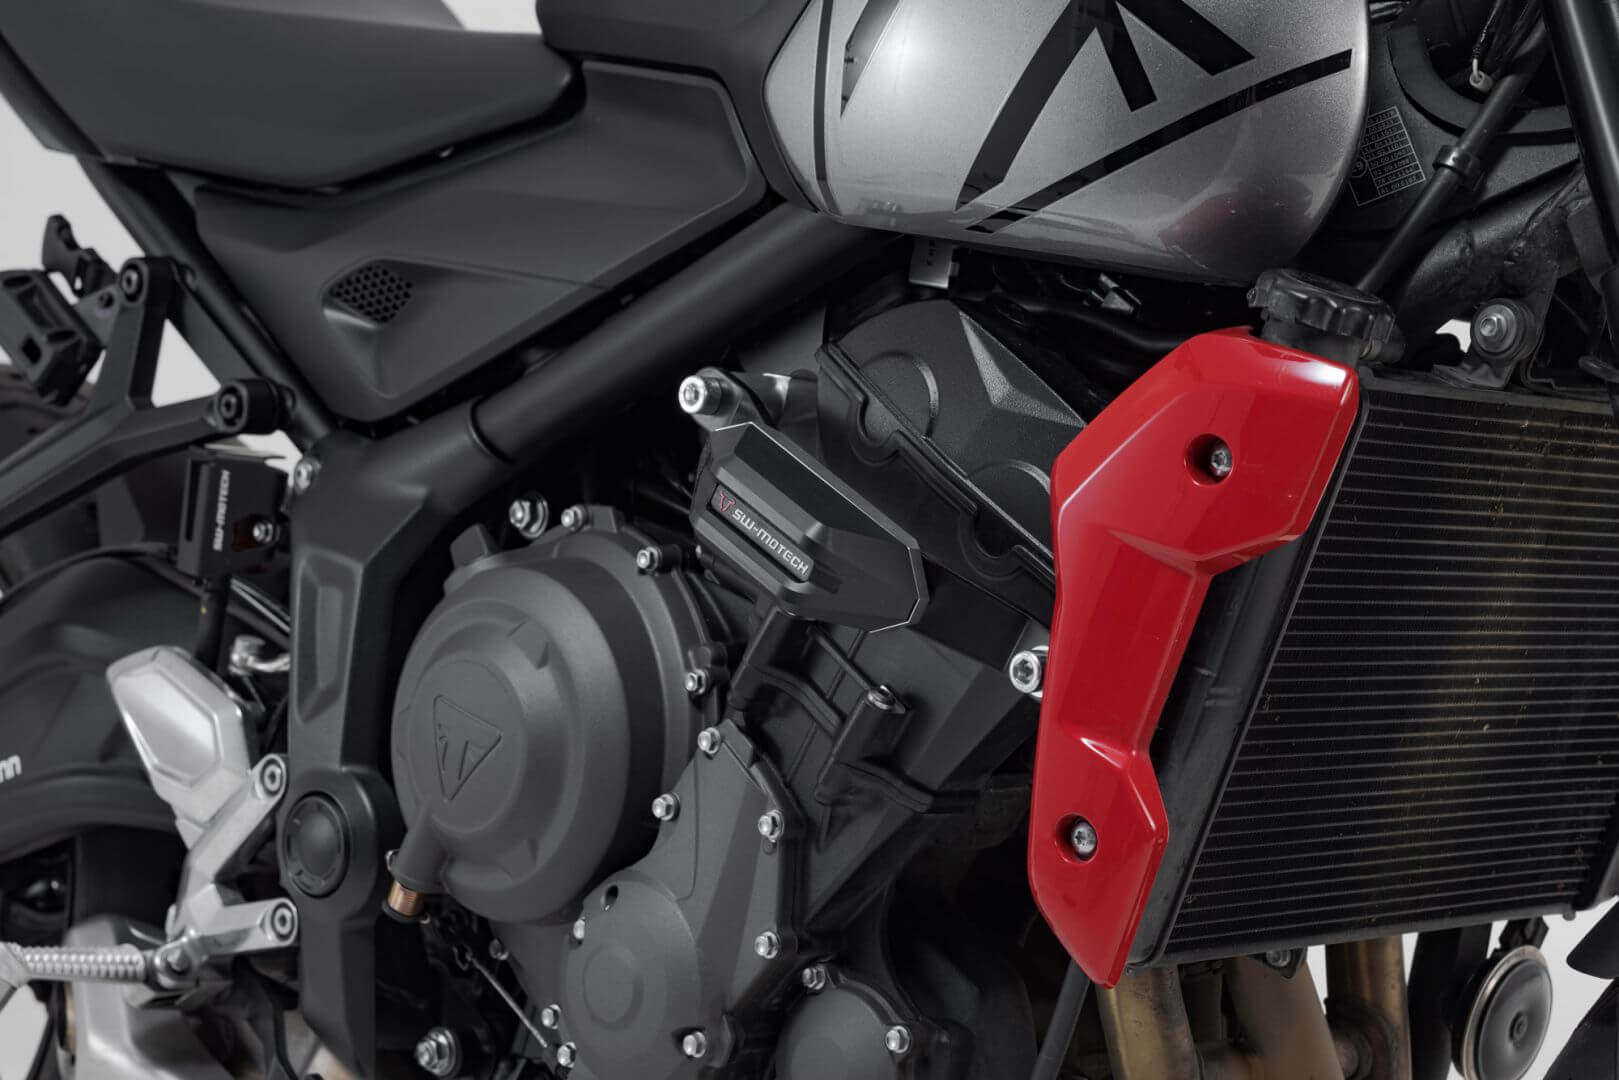 SW-MOTECH equips the Triumph Trident 660 with accessories - SW-MOTECH